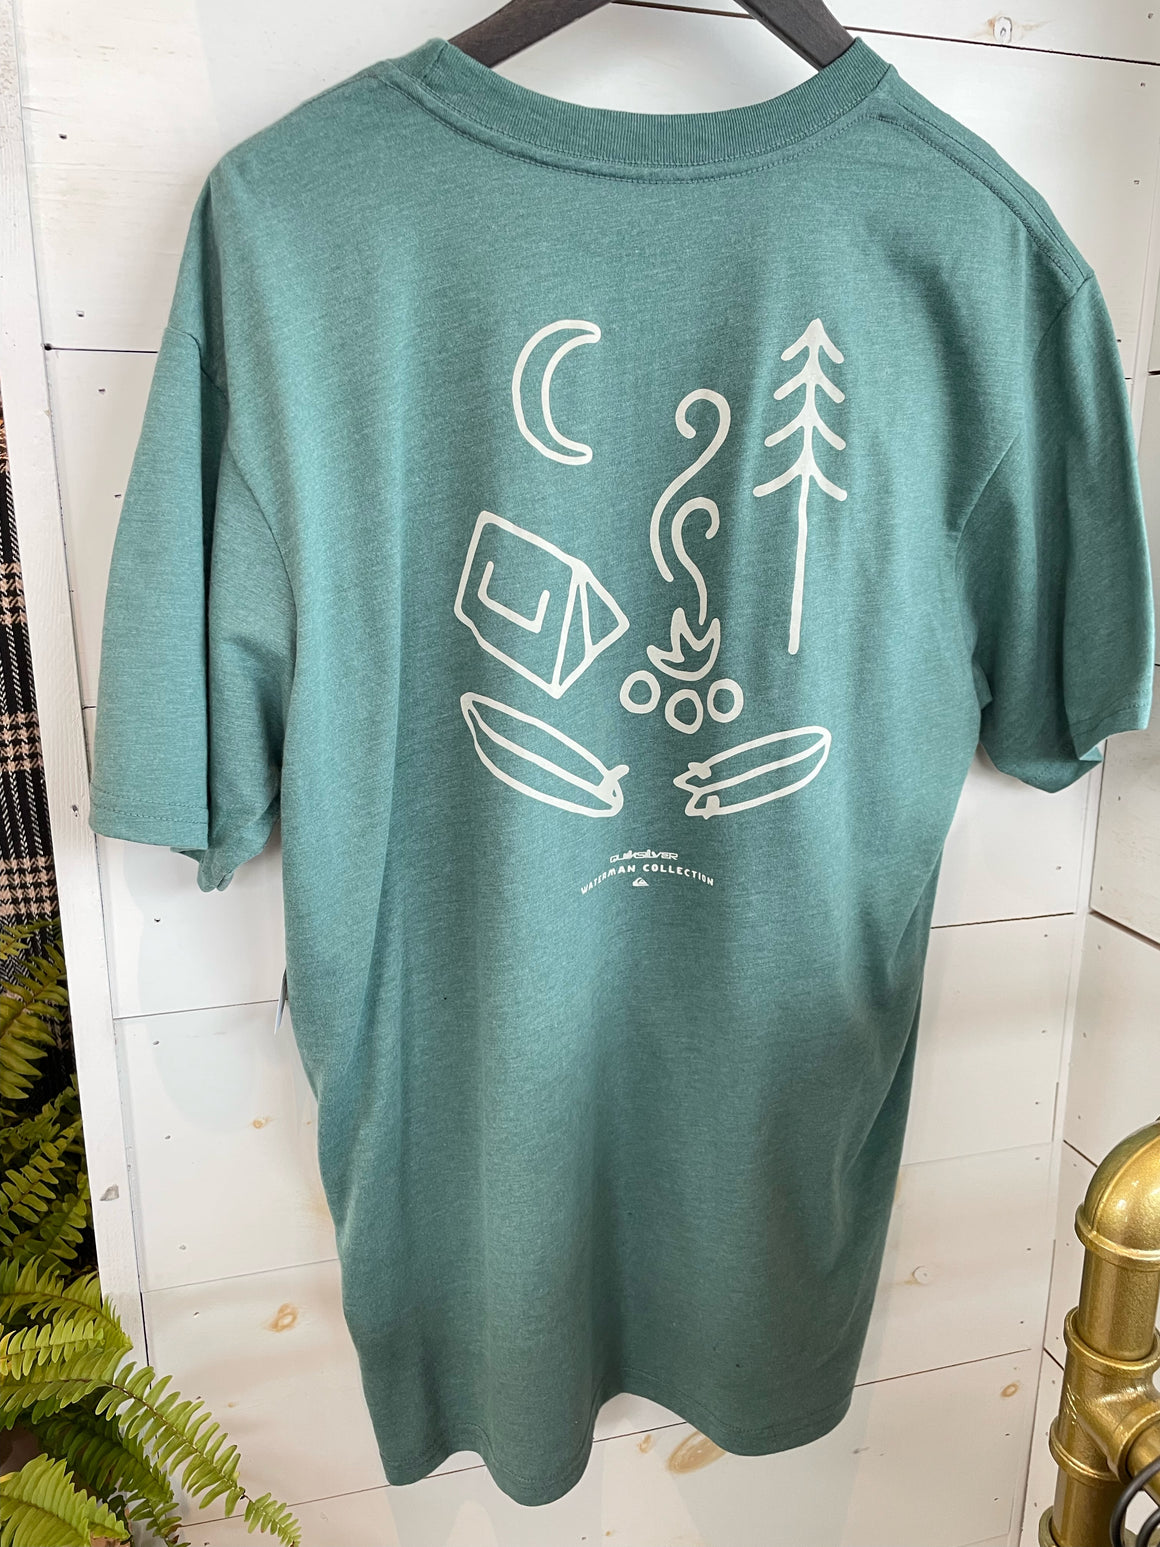 Quiksilver Campgrounds Tee.